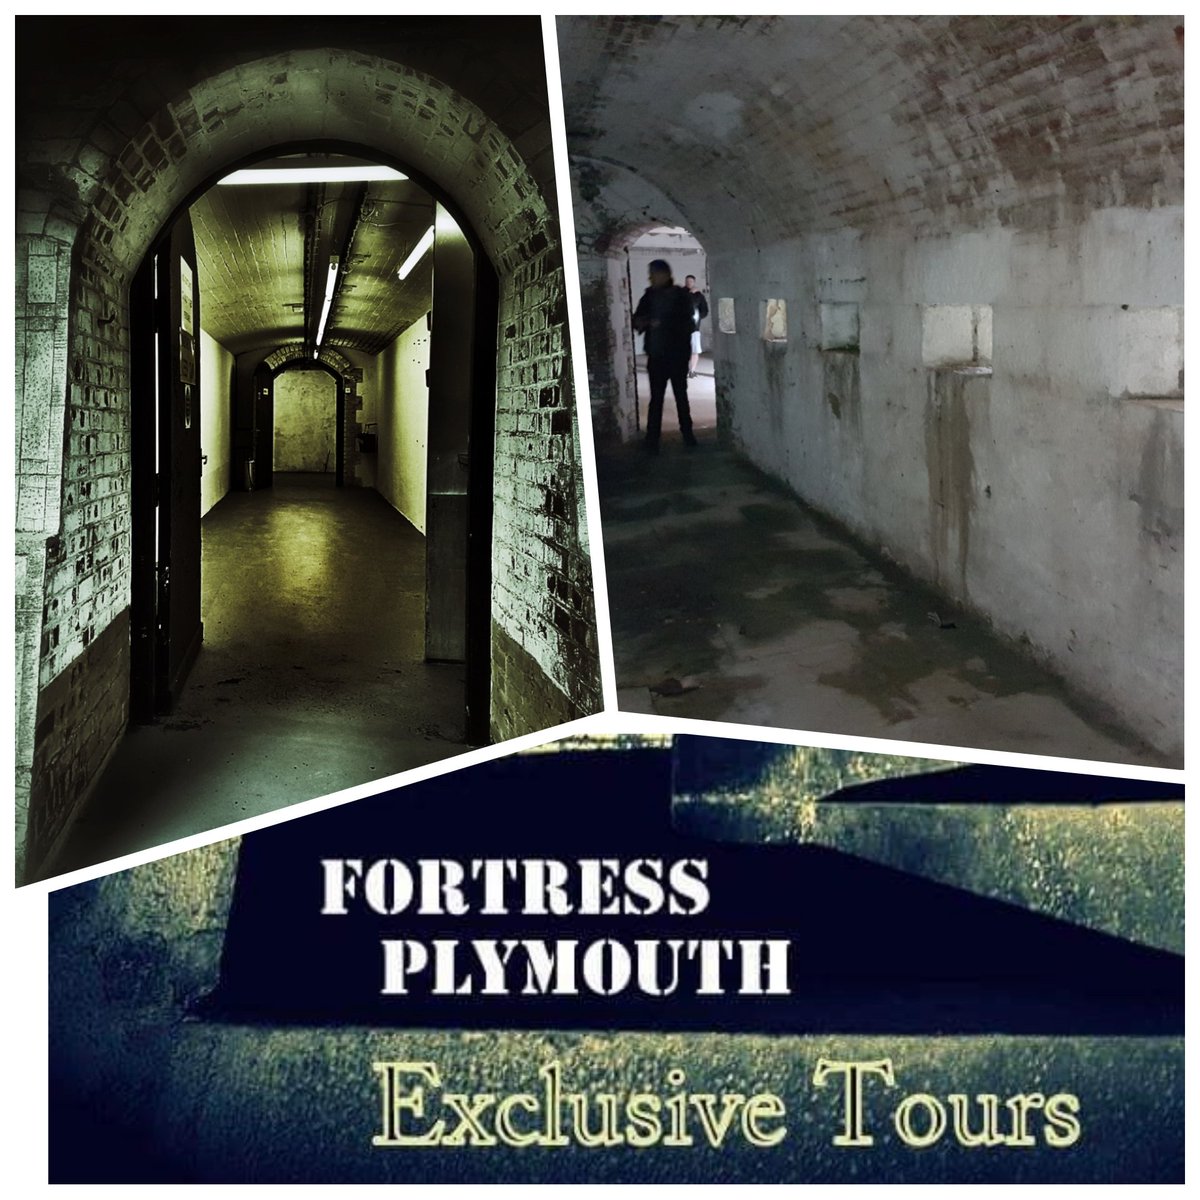 Fortress Plymouth Exclusive Tours @Plymouth_Live @PlymouthParents @WalkwithHistory @BestTourGuide @TourPenzance @oceancitytours @Sophie_1WWTours @MilitaryHistory